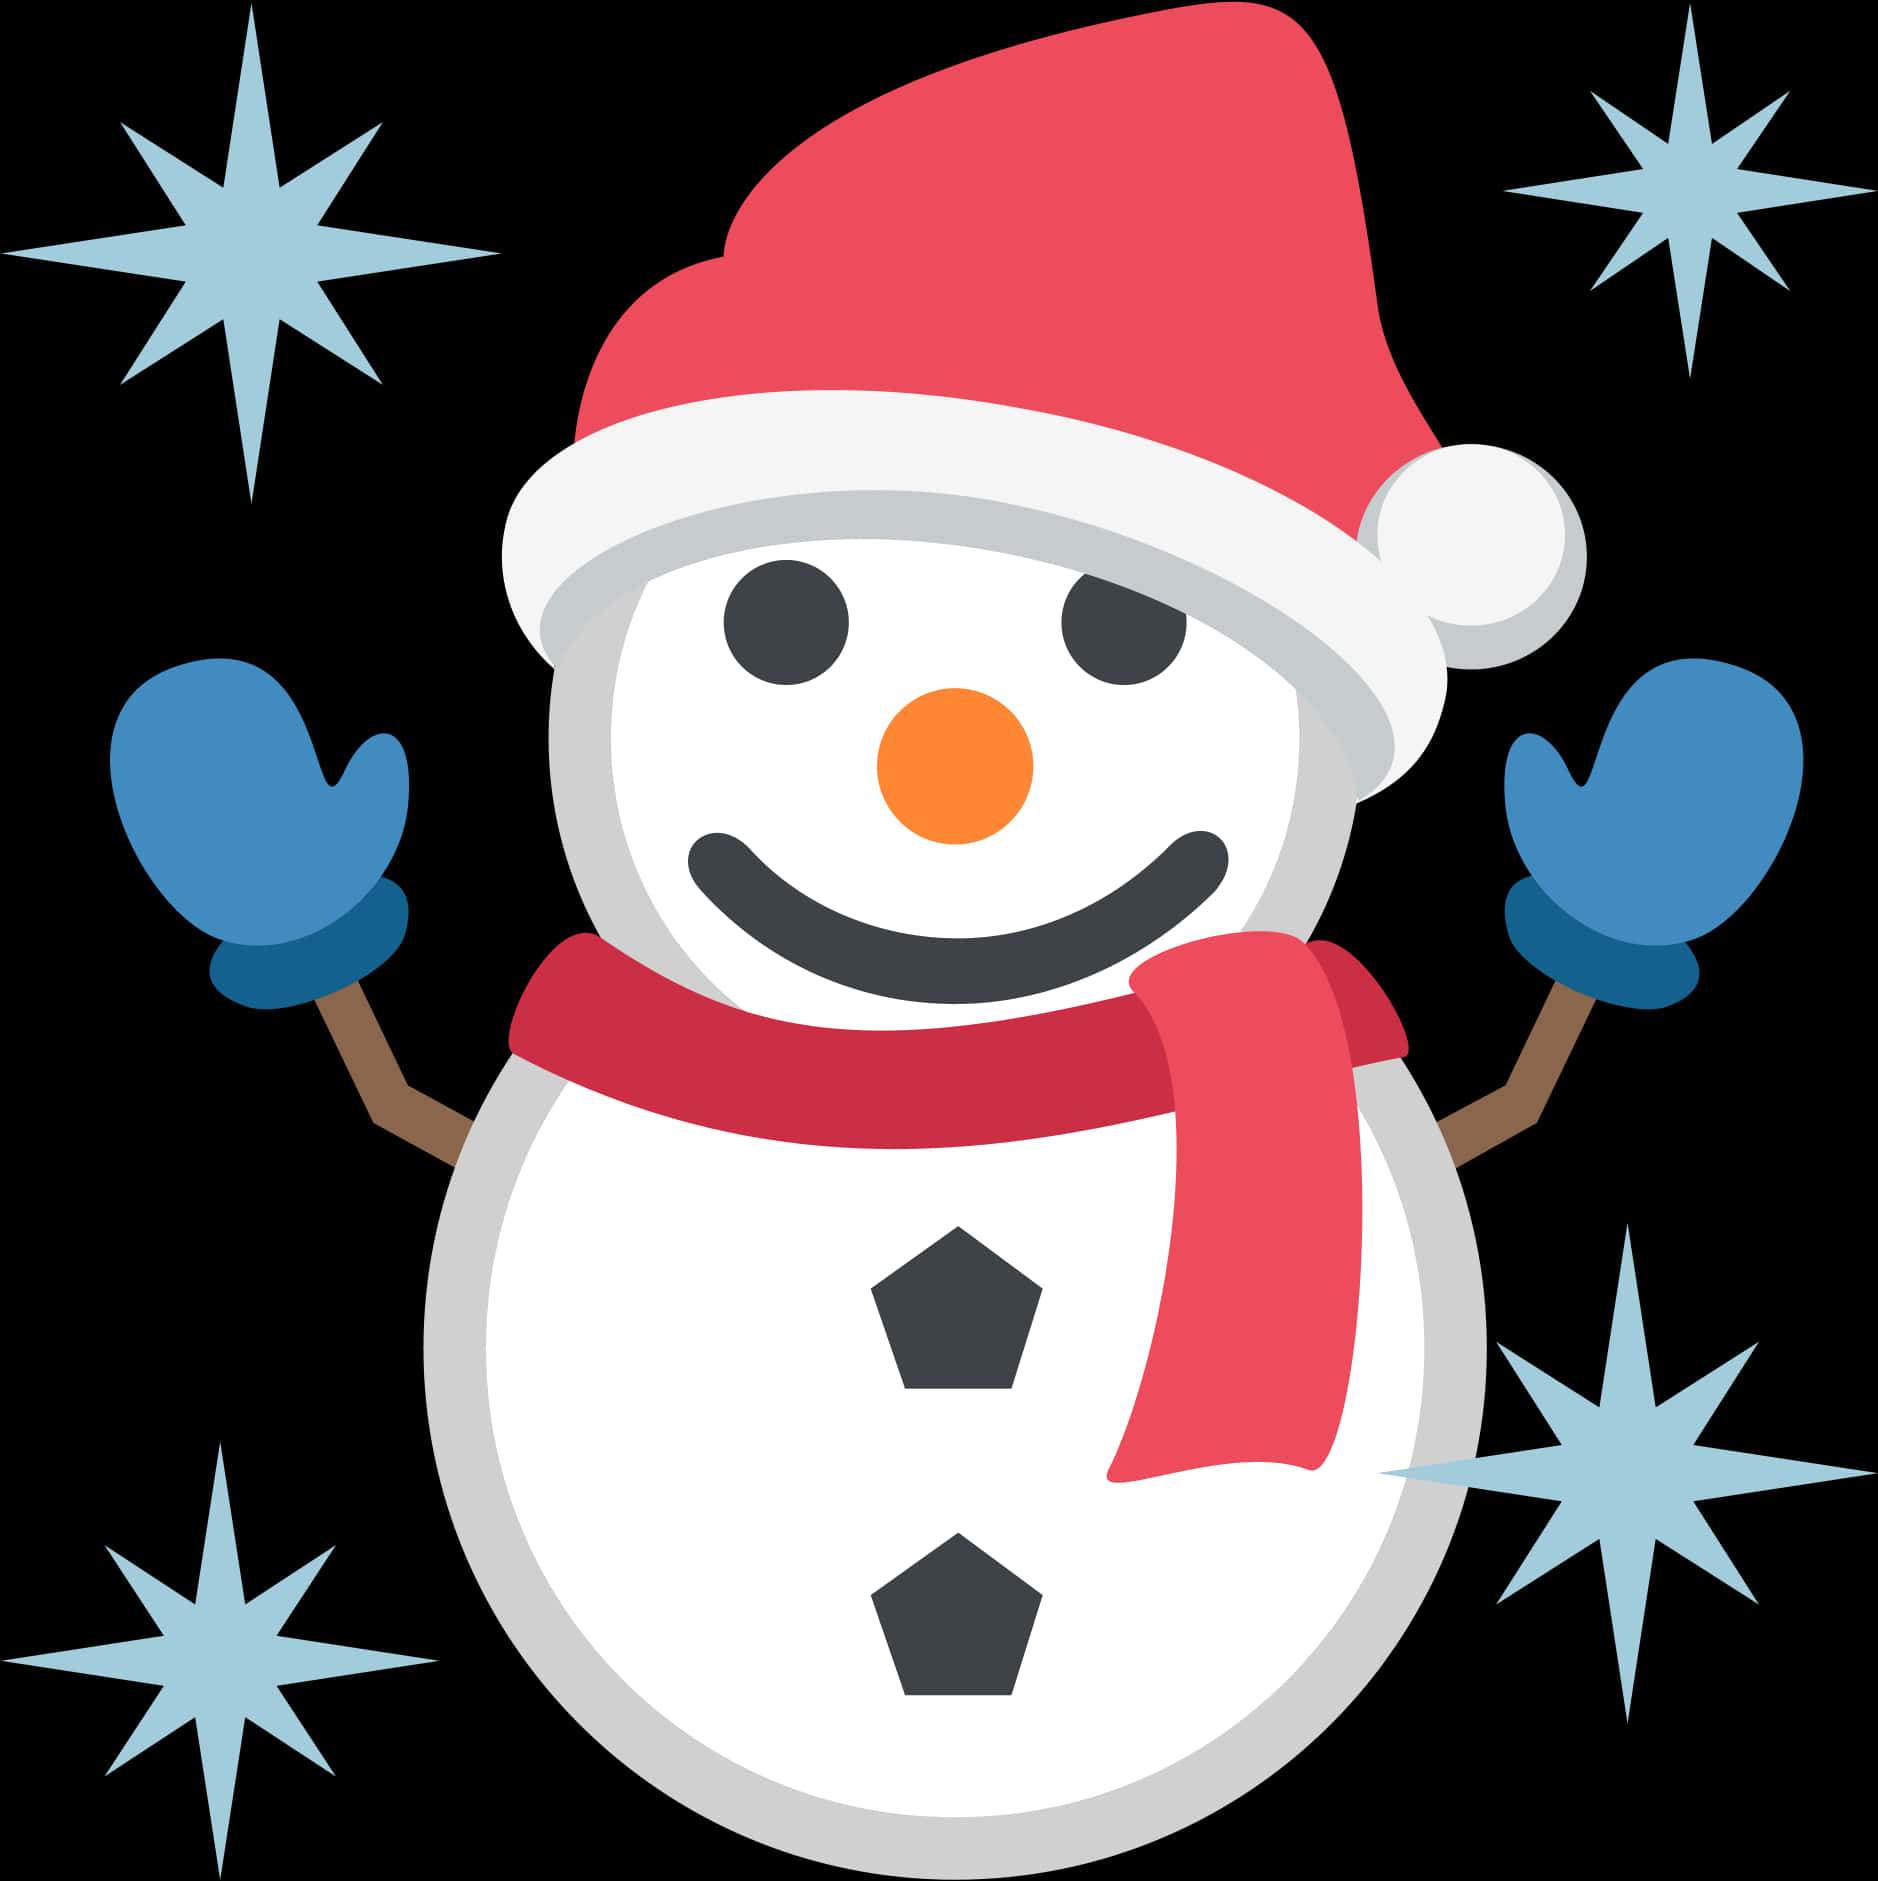 A Snowman With A Red Hat And Scarf And Mittens